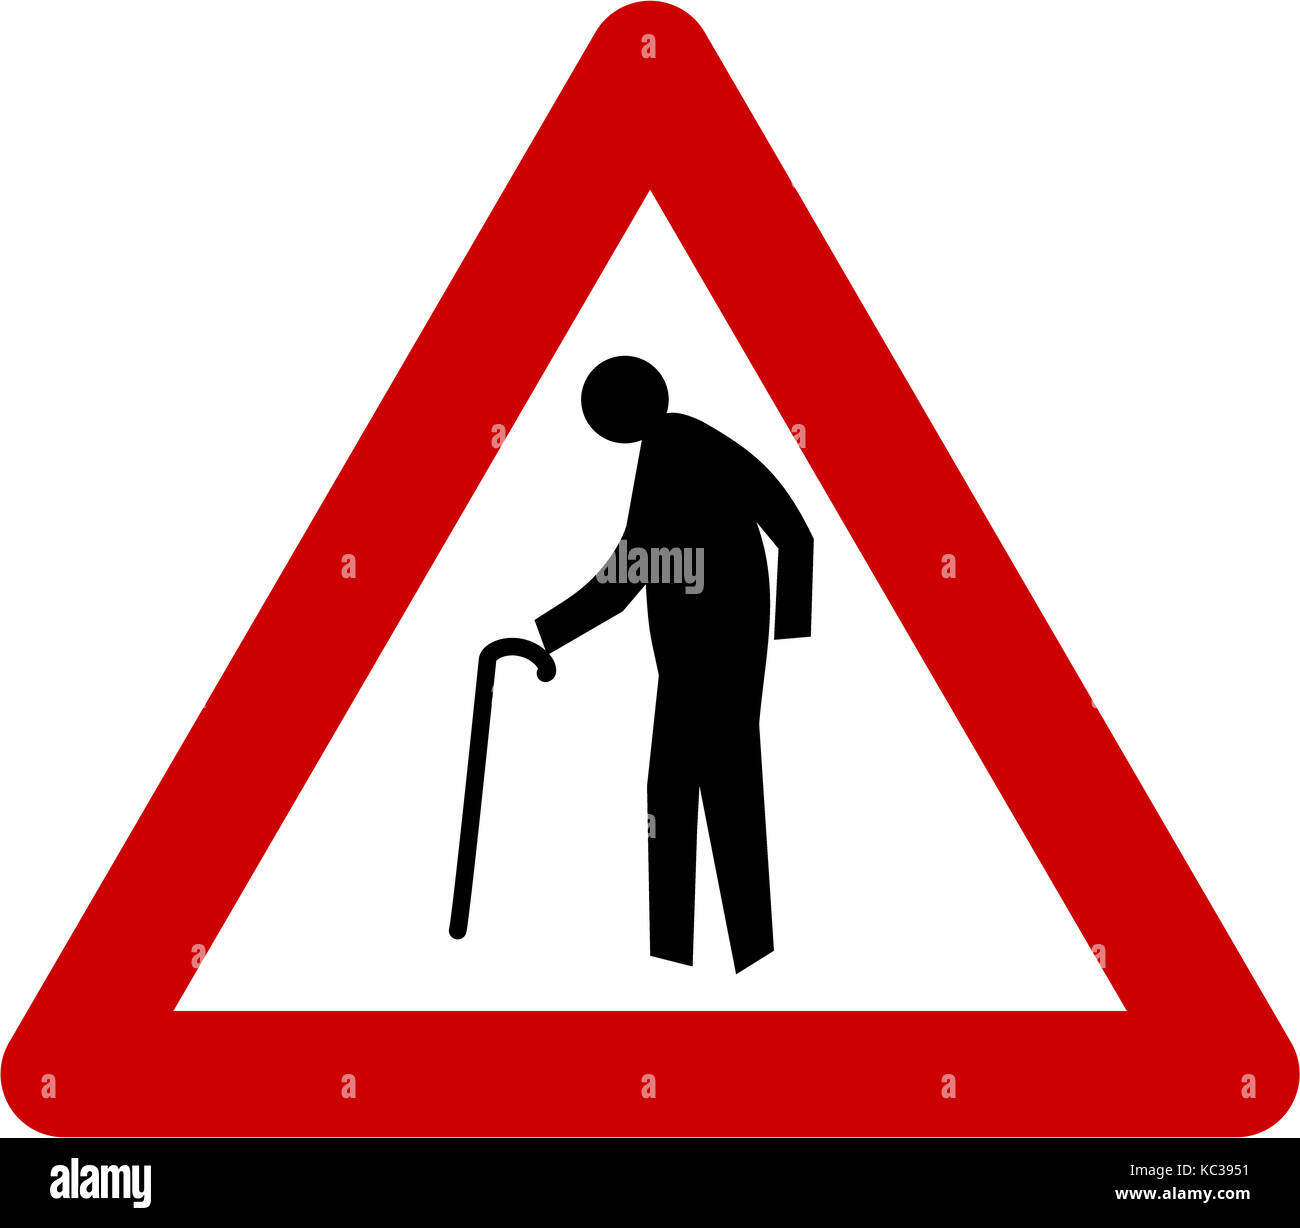 These elderly crossing signs will make your day